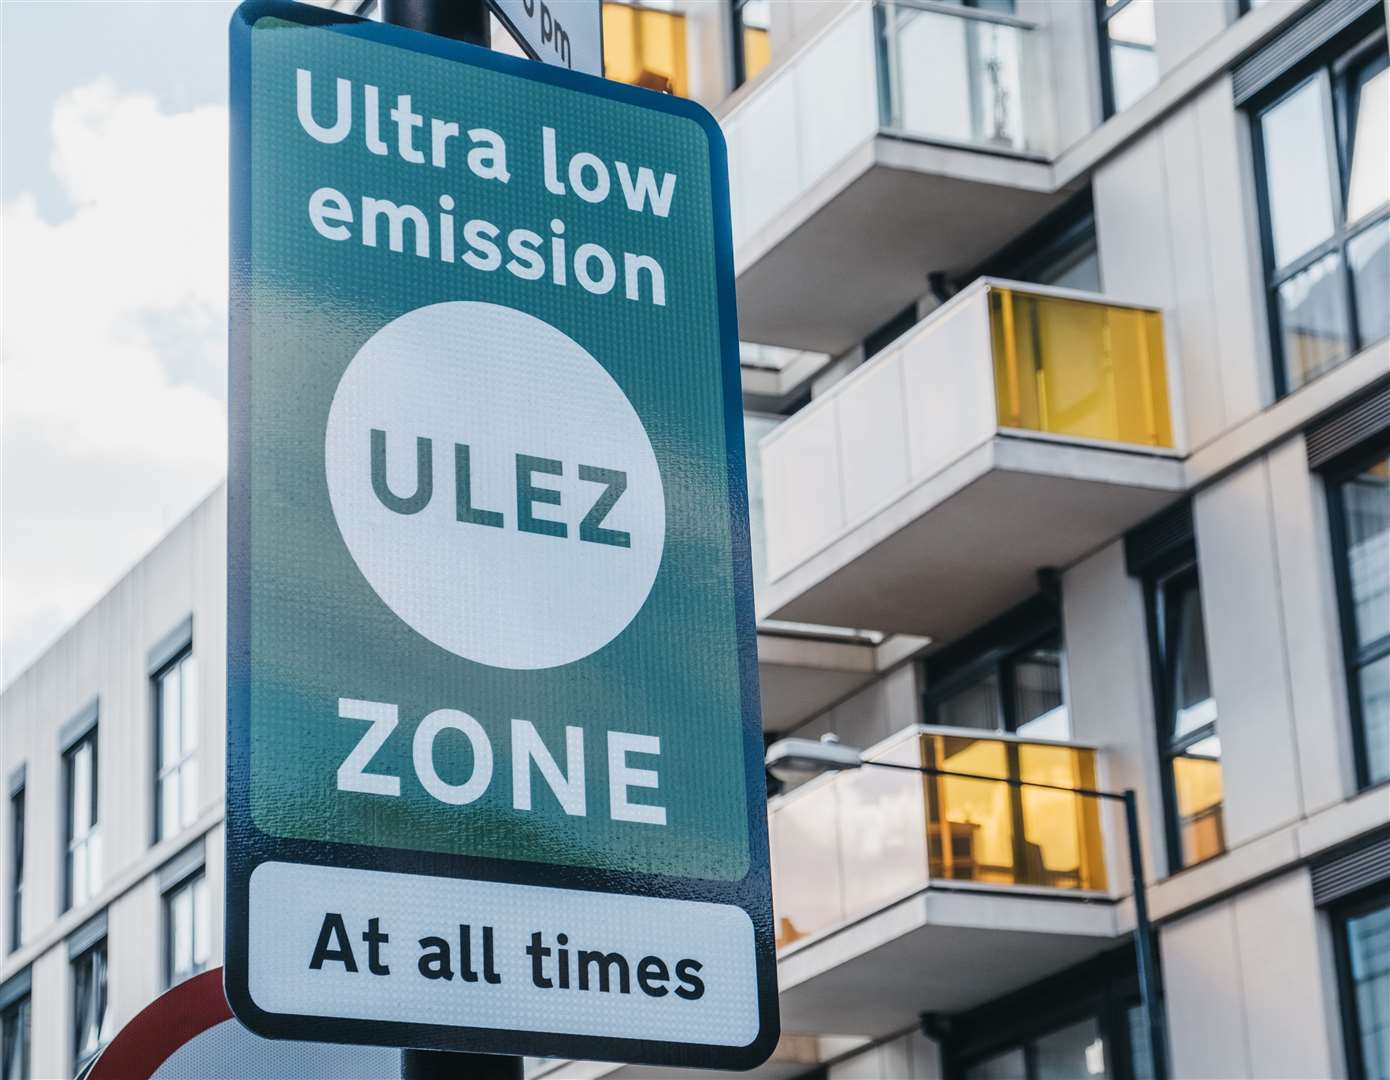 Signs indicating Ultra Low Emission Zone (ULEZ) on a street in London, UK.